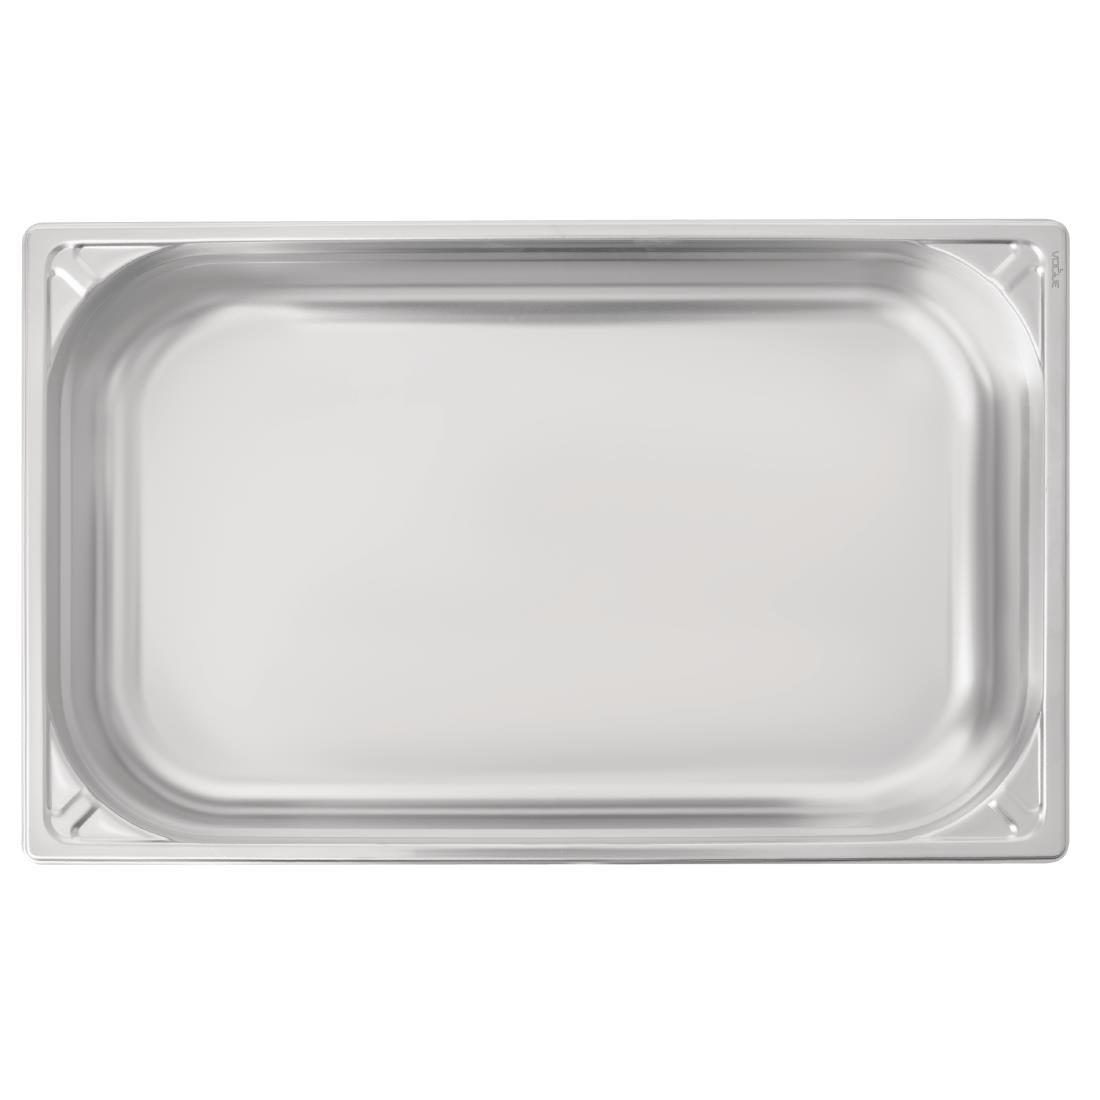 Vogue Heavy Duty Stainless Steel 1/1 Gastronorm Pan 100mm - DW434  - 4